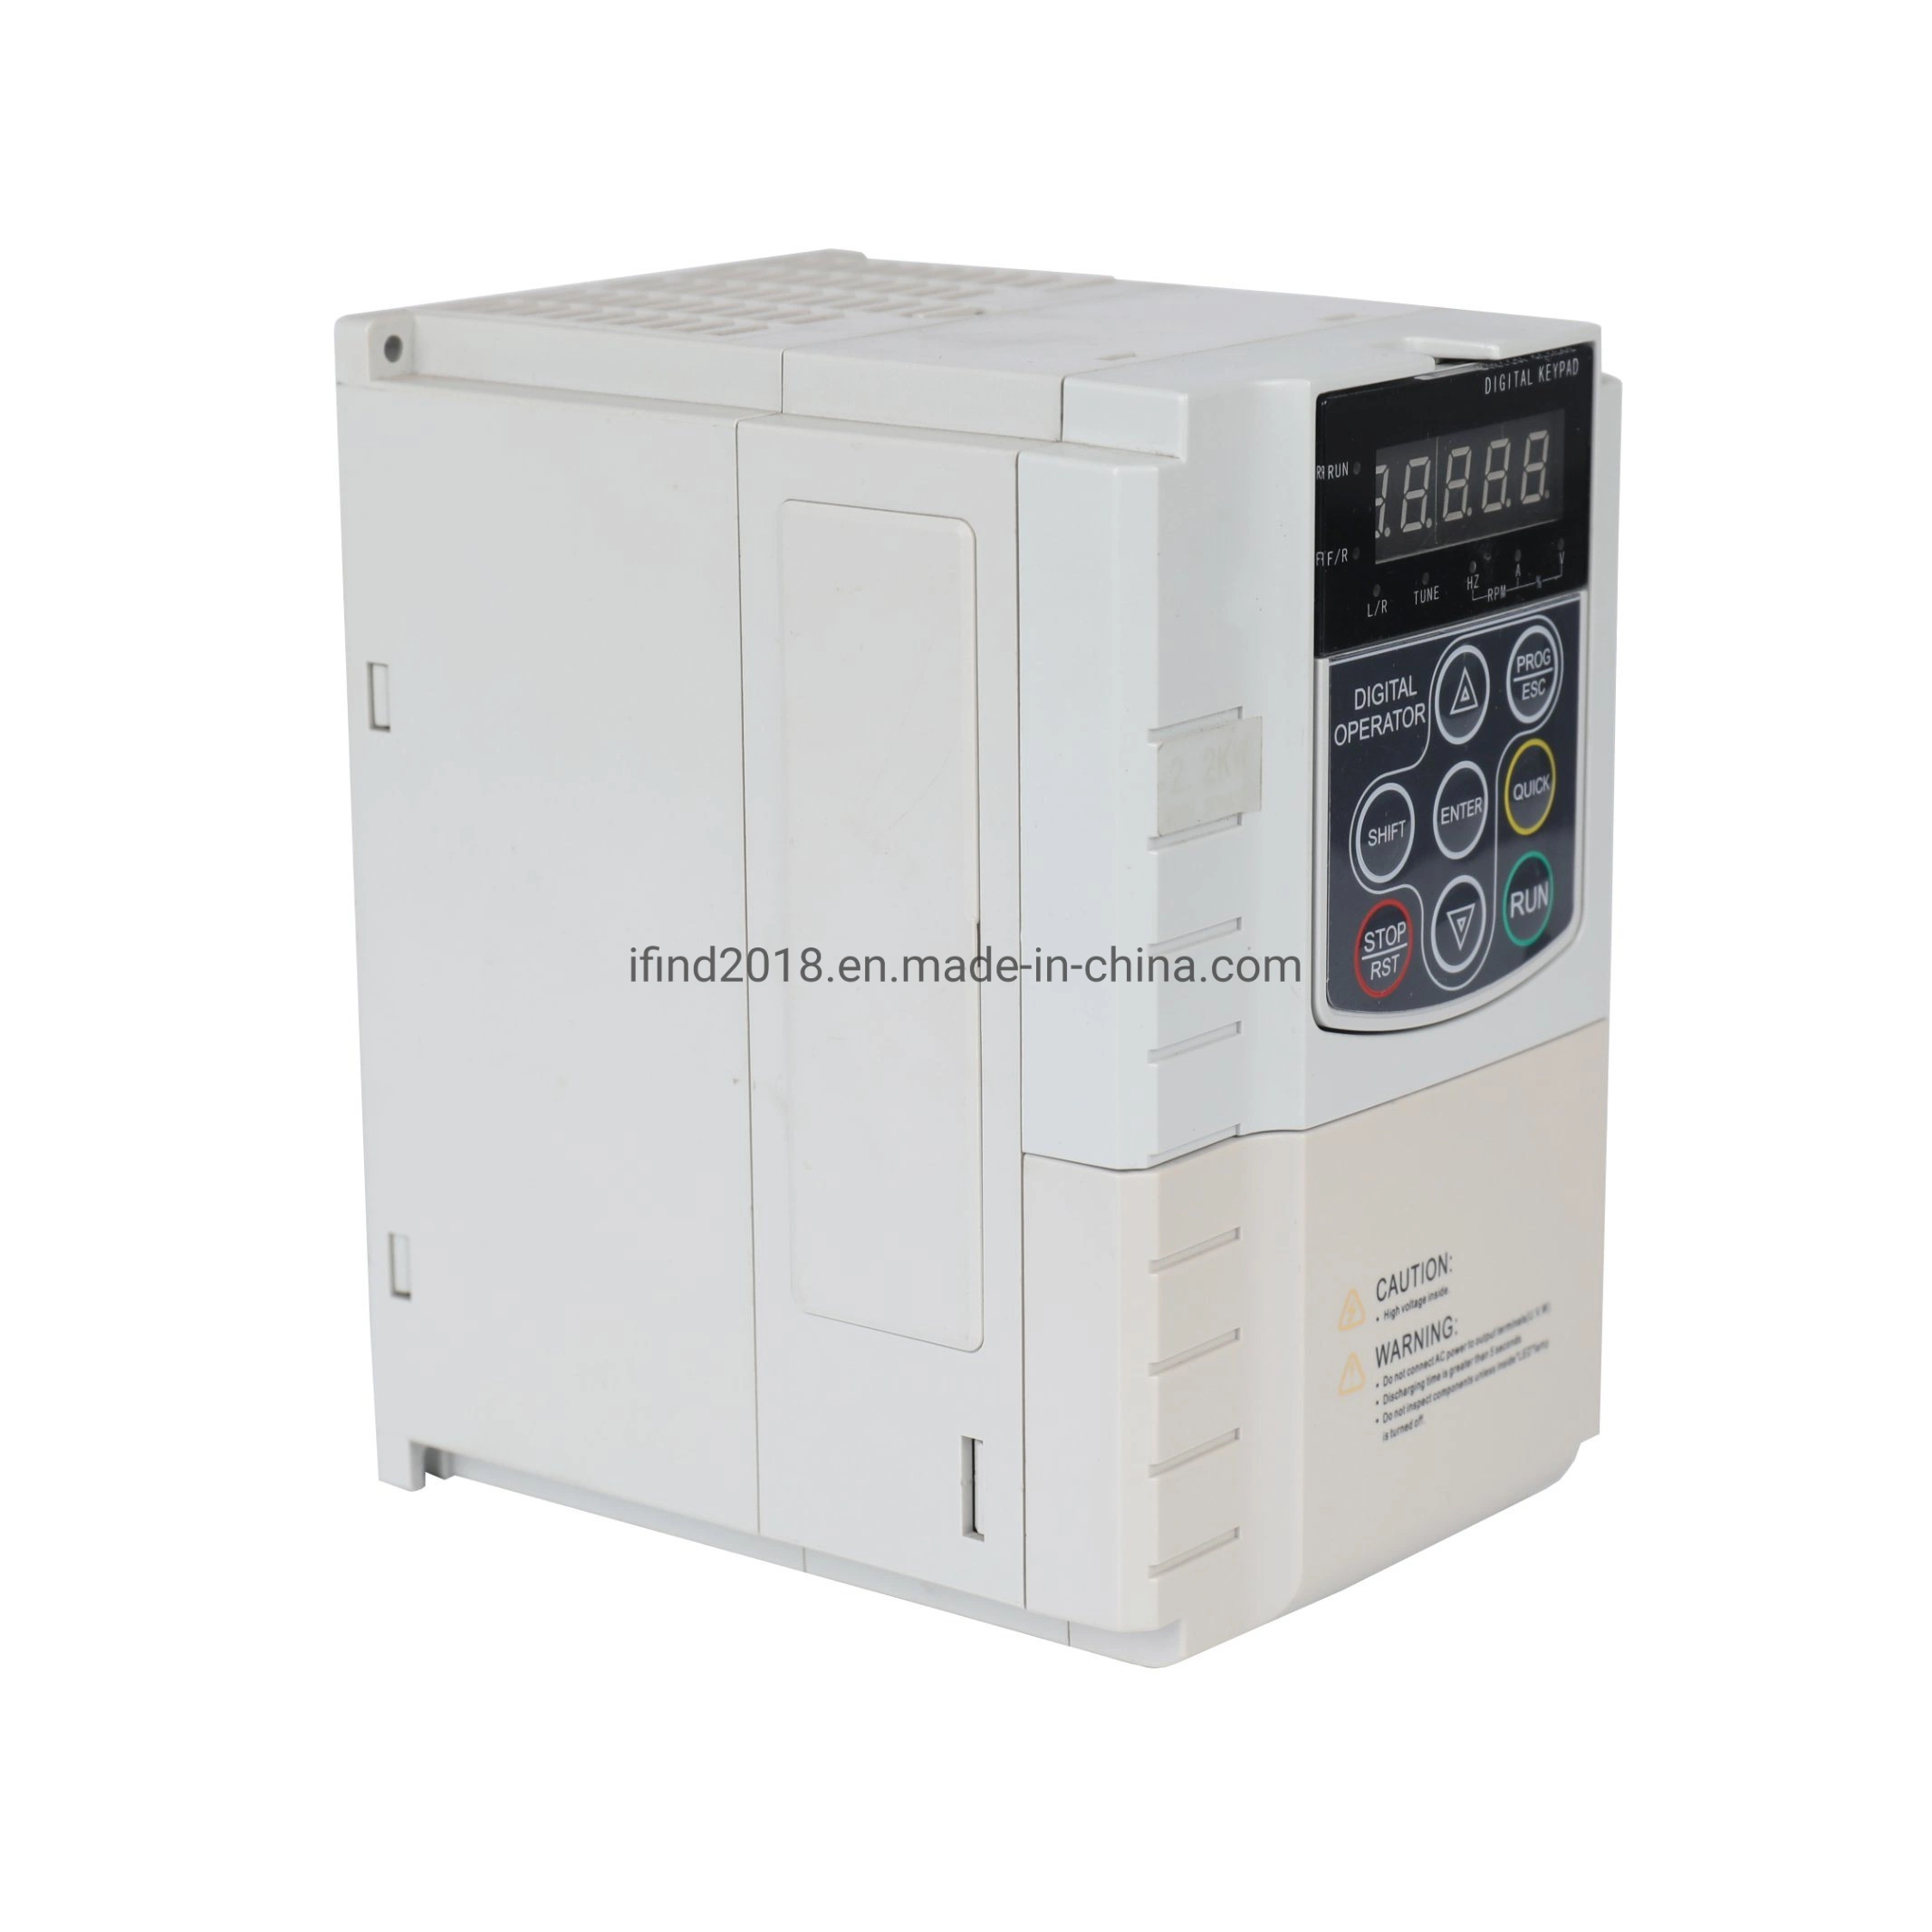 Asynchronous Motor of Elevator Lifts VFD Frequency Inverter Frequency Converter Speed Controller